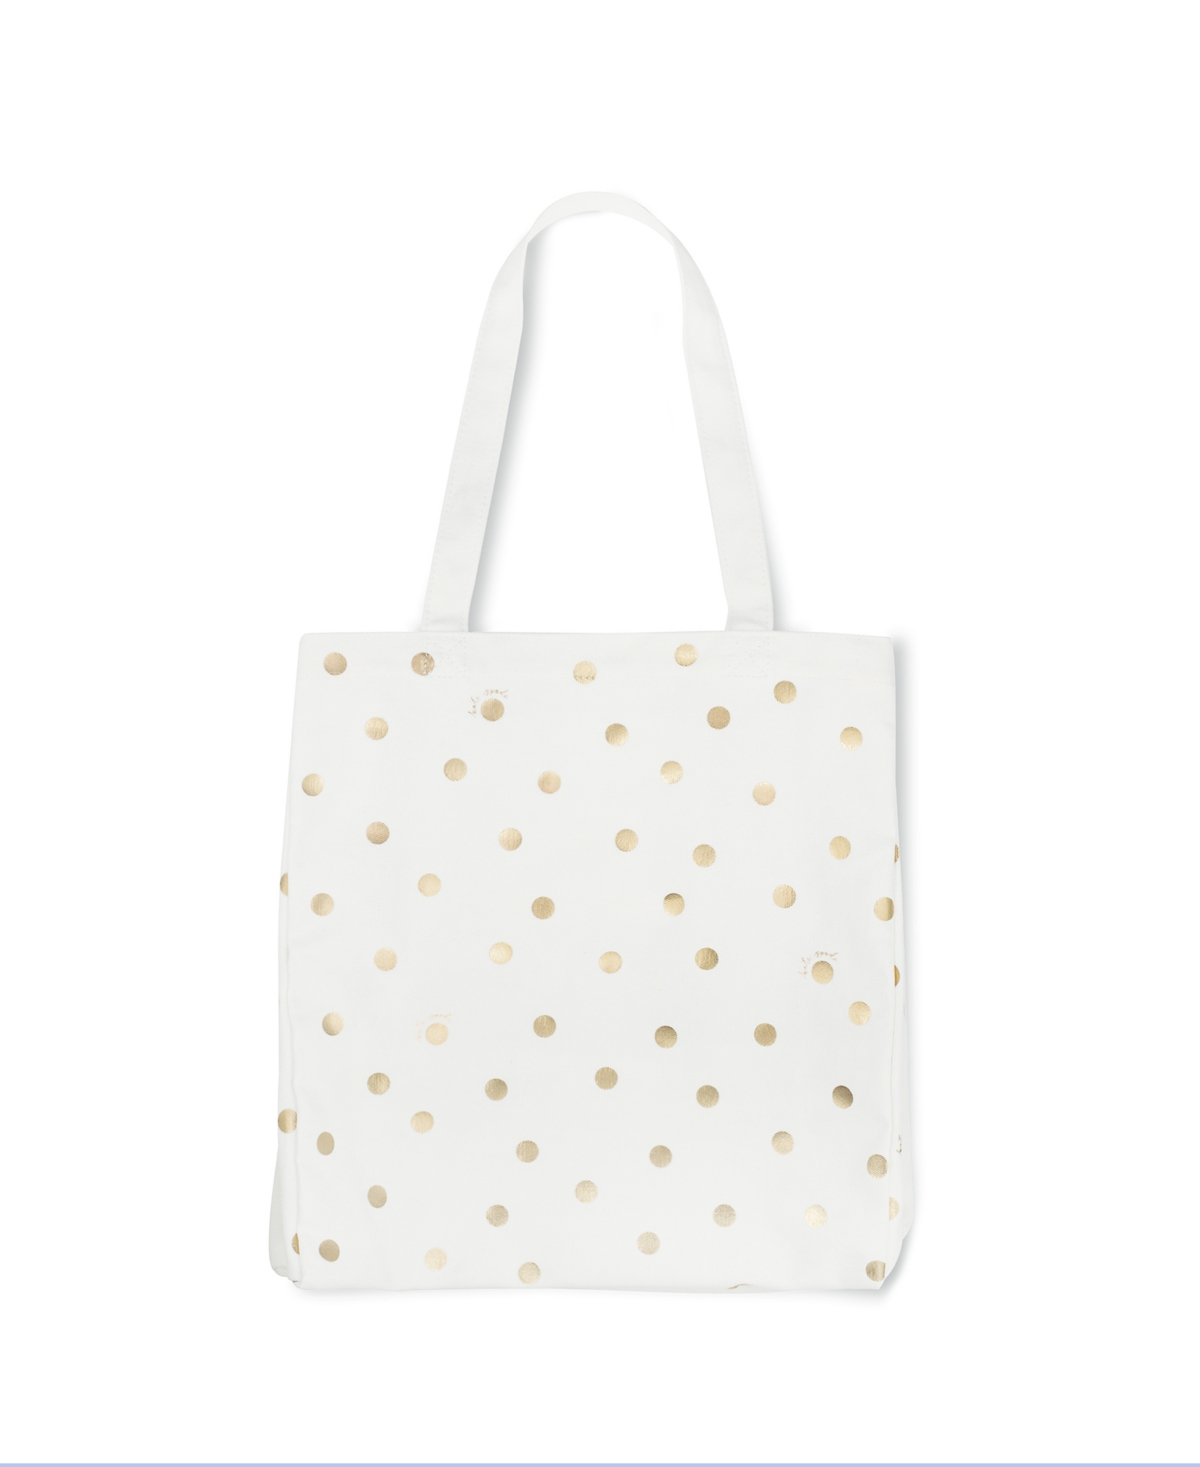 Kate Spade New York Canvas Tote With Gold Polka Dots In White